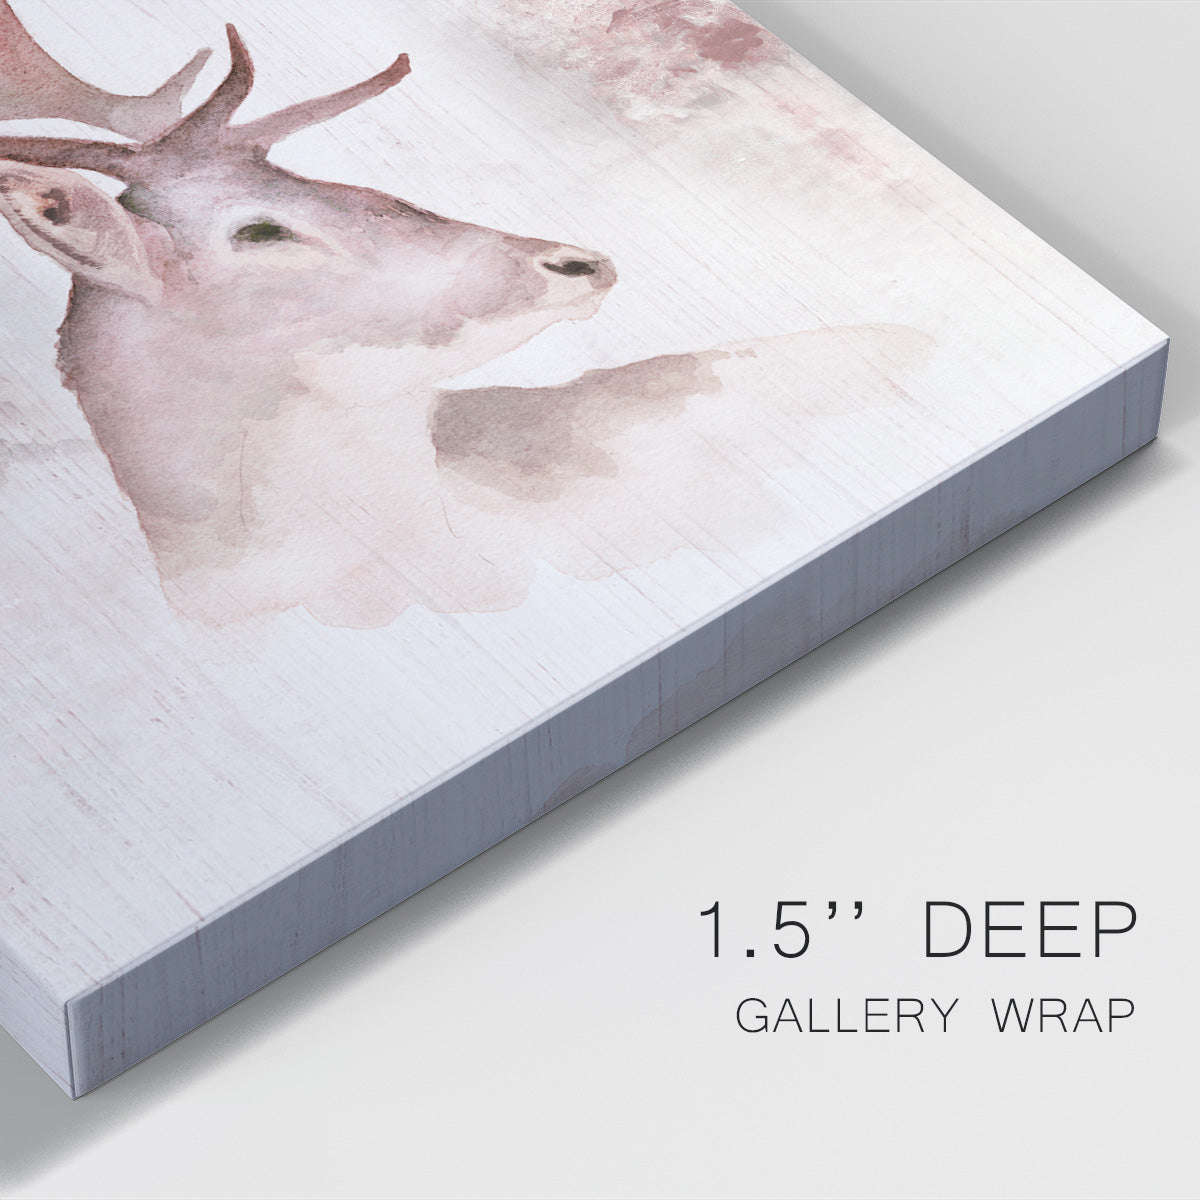 Blush Deer Premium Gallery Wrapped Canvas - Ready to Hang